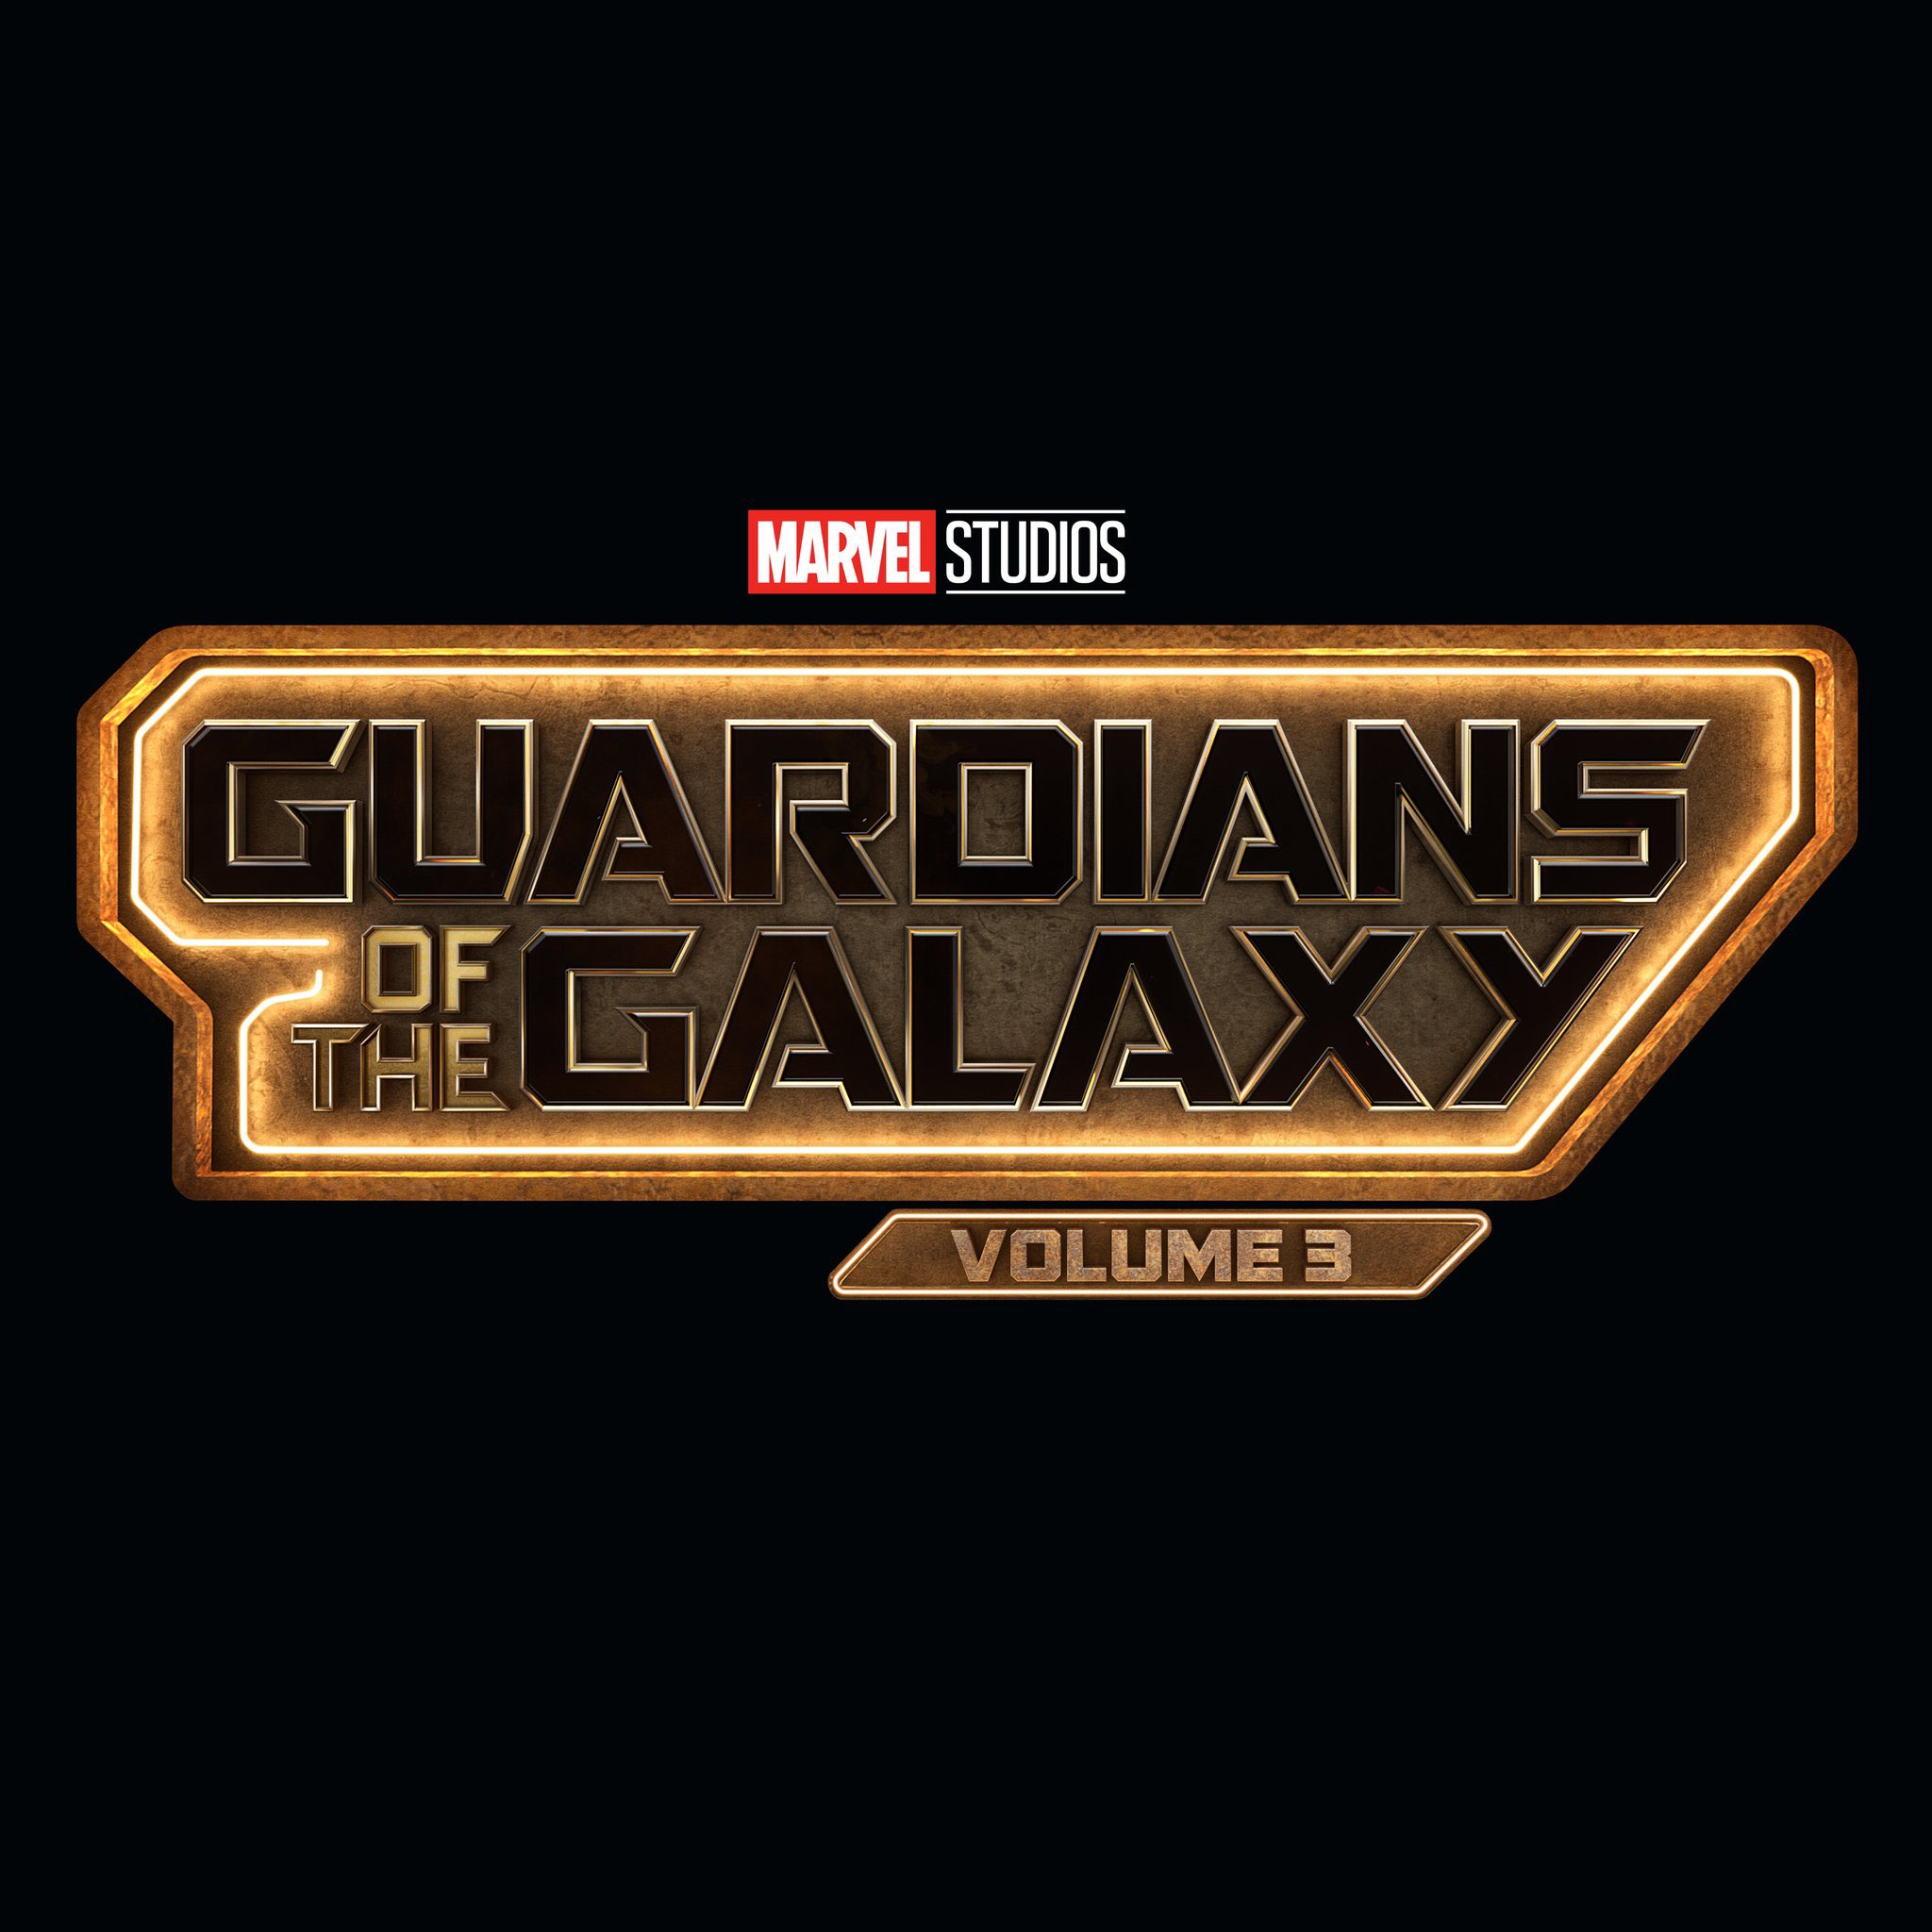 Guardians of the Galaxy Vol. 3, Release Dates